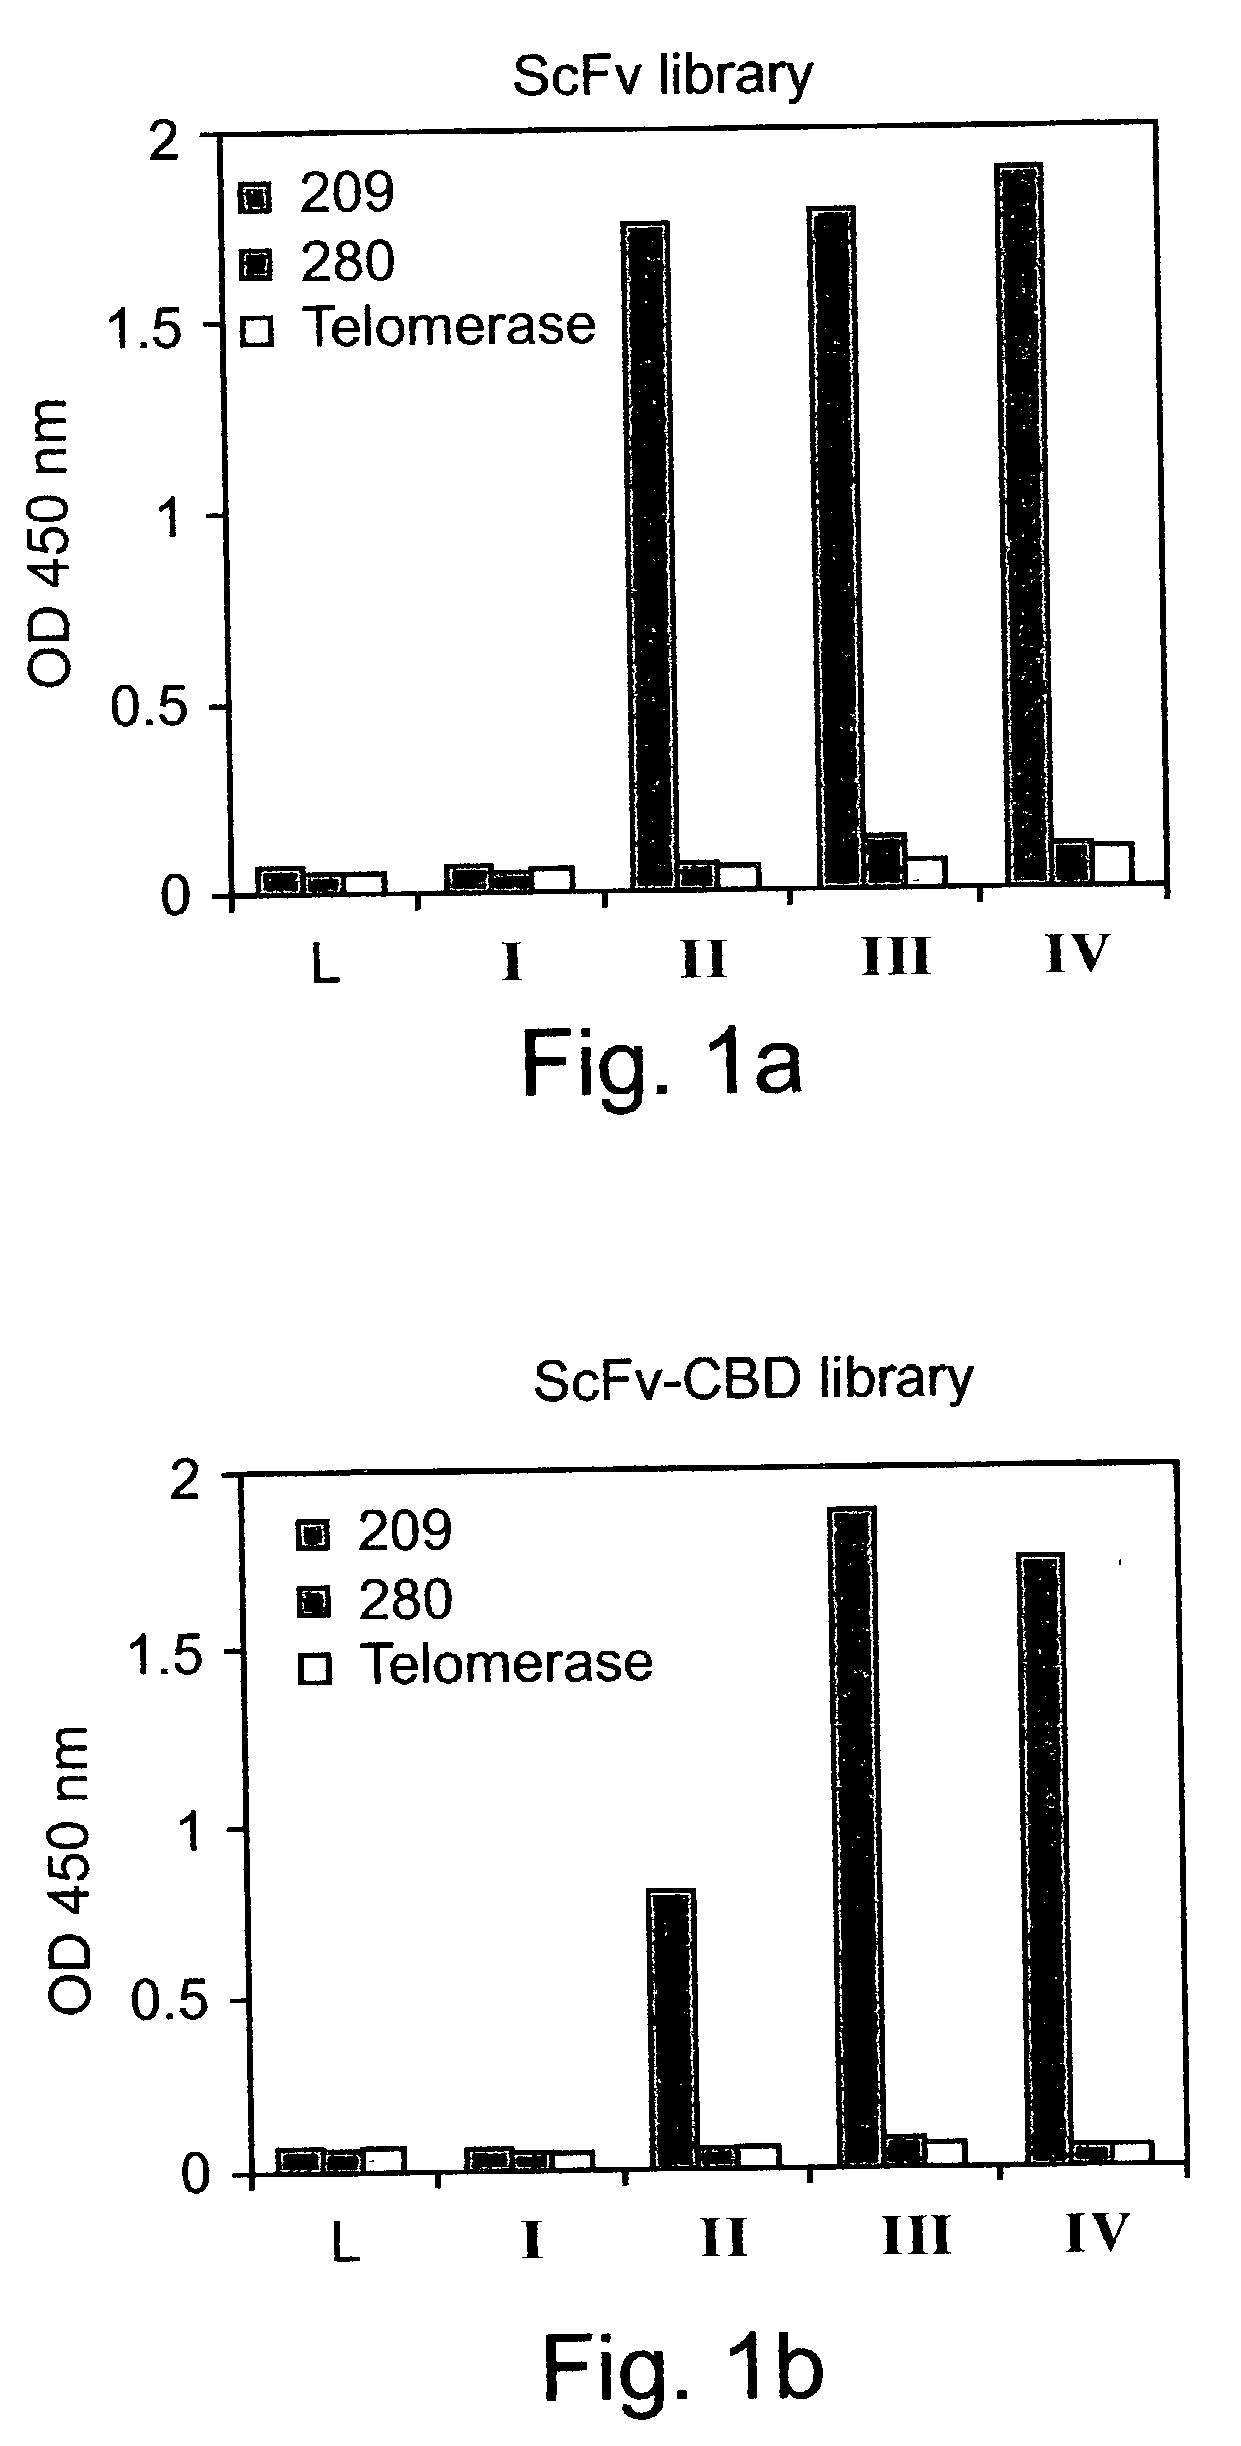 Antibody having a t-cell receptor-like specificity, yet higher affinity, and the use of same in the detection and treatment of cancer, viral infection and autoimmune disease